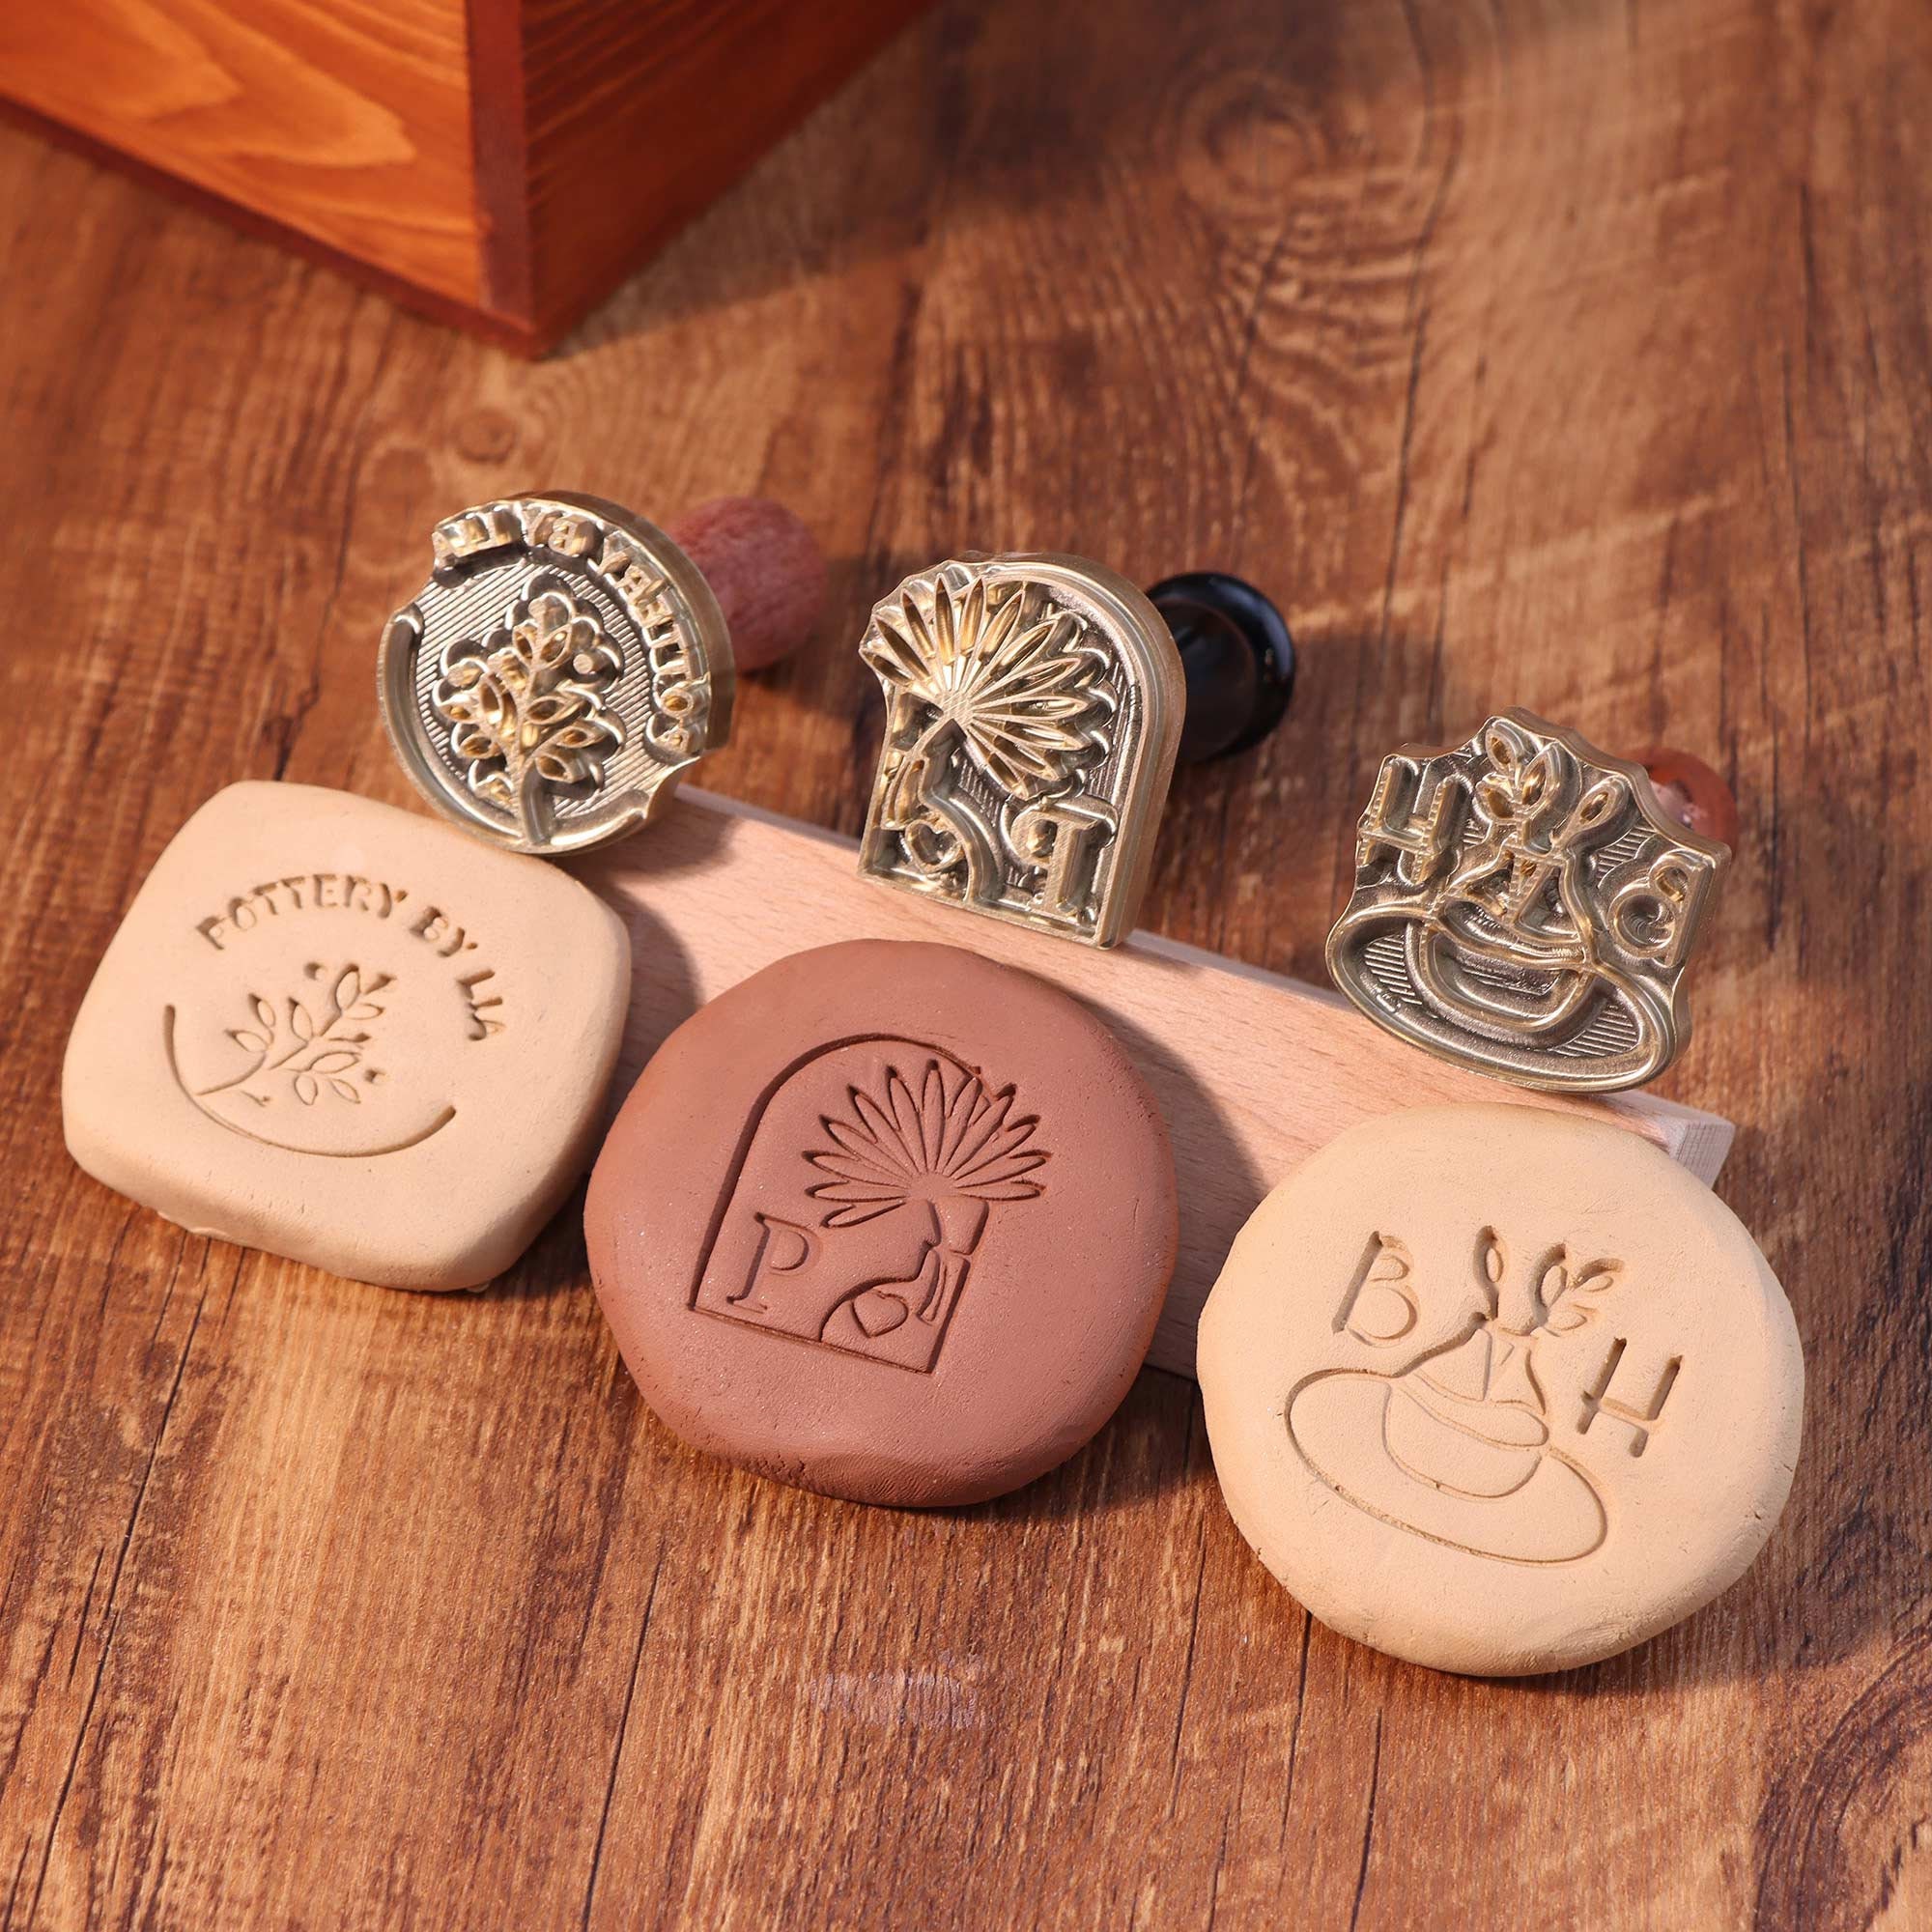 Custom Pottery Stamp, Pottery Signature Stamp, Personalized Clay Stamp,  Ceramic Stamp, Polymer Stamp 